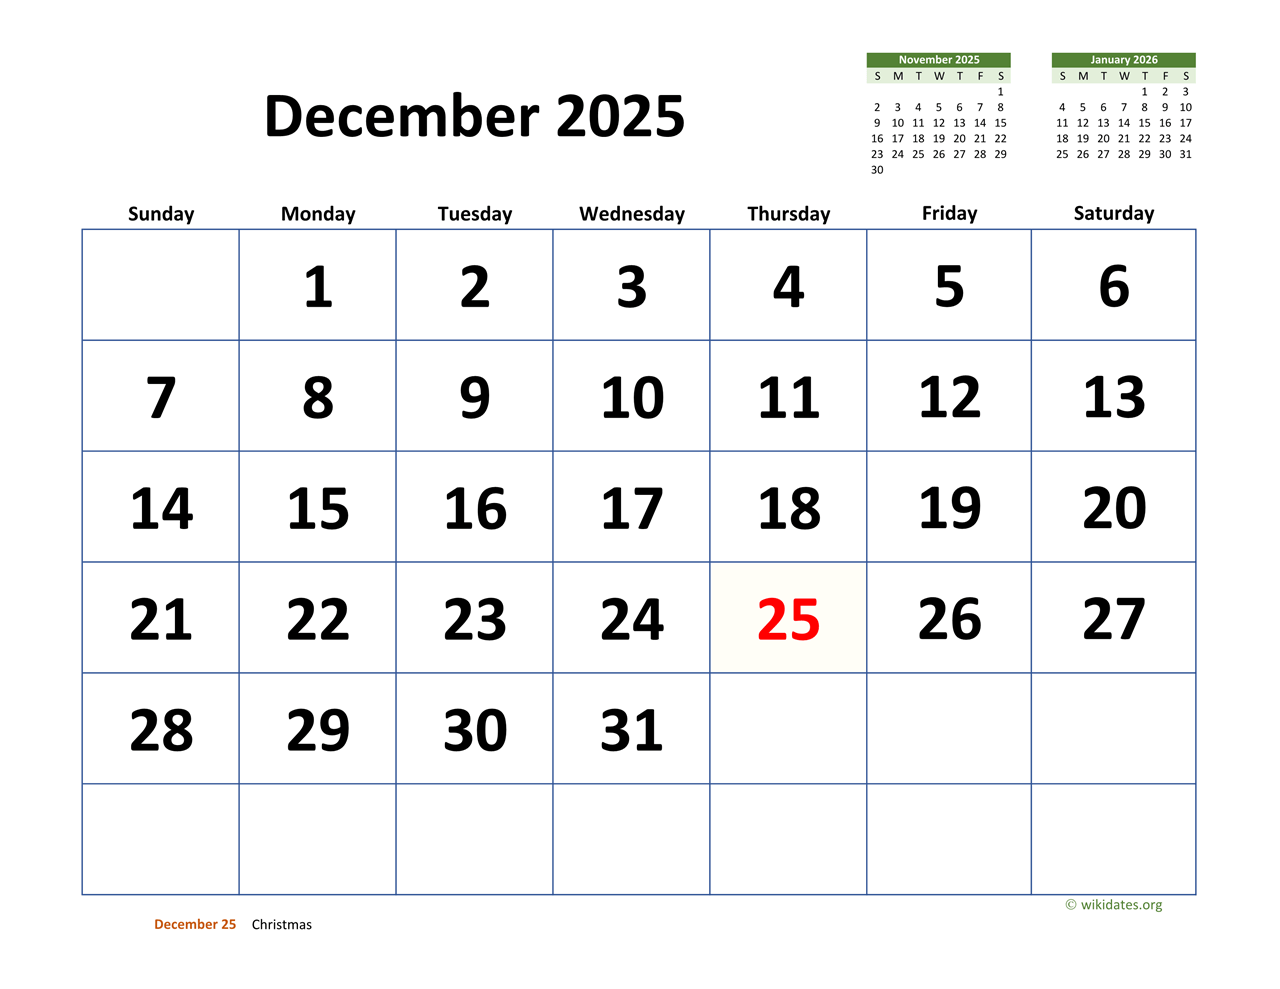 december-2025-calendar-with-extra-large-dates-wikidates